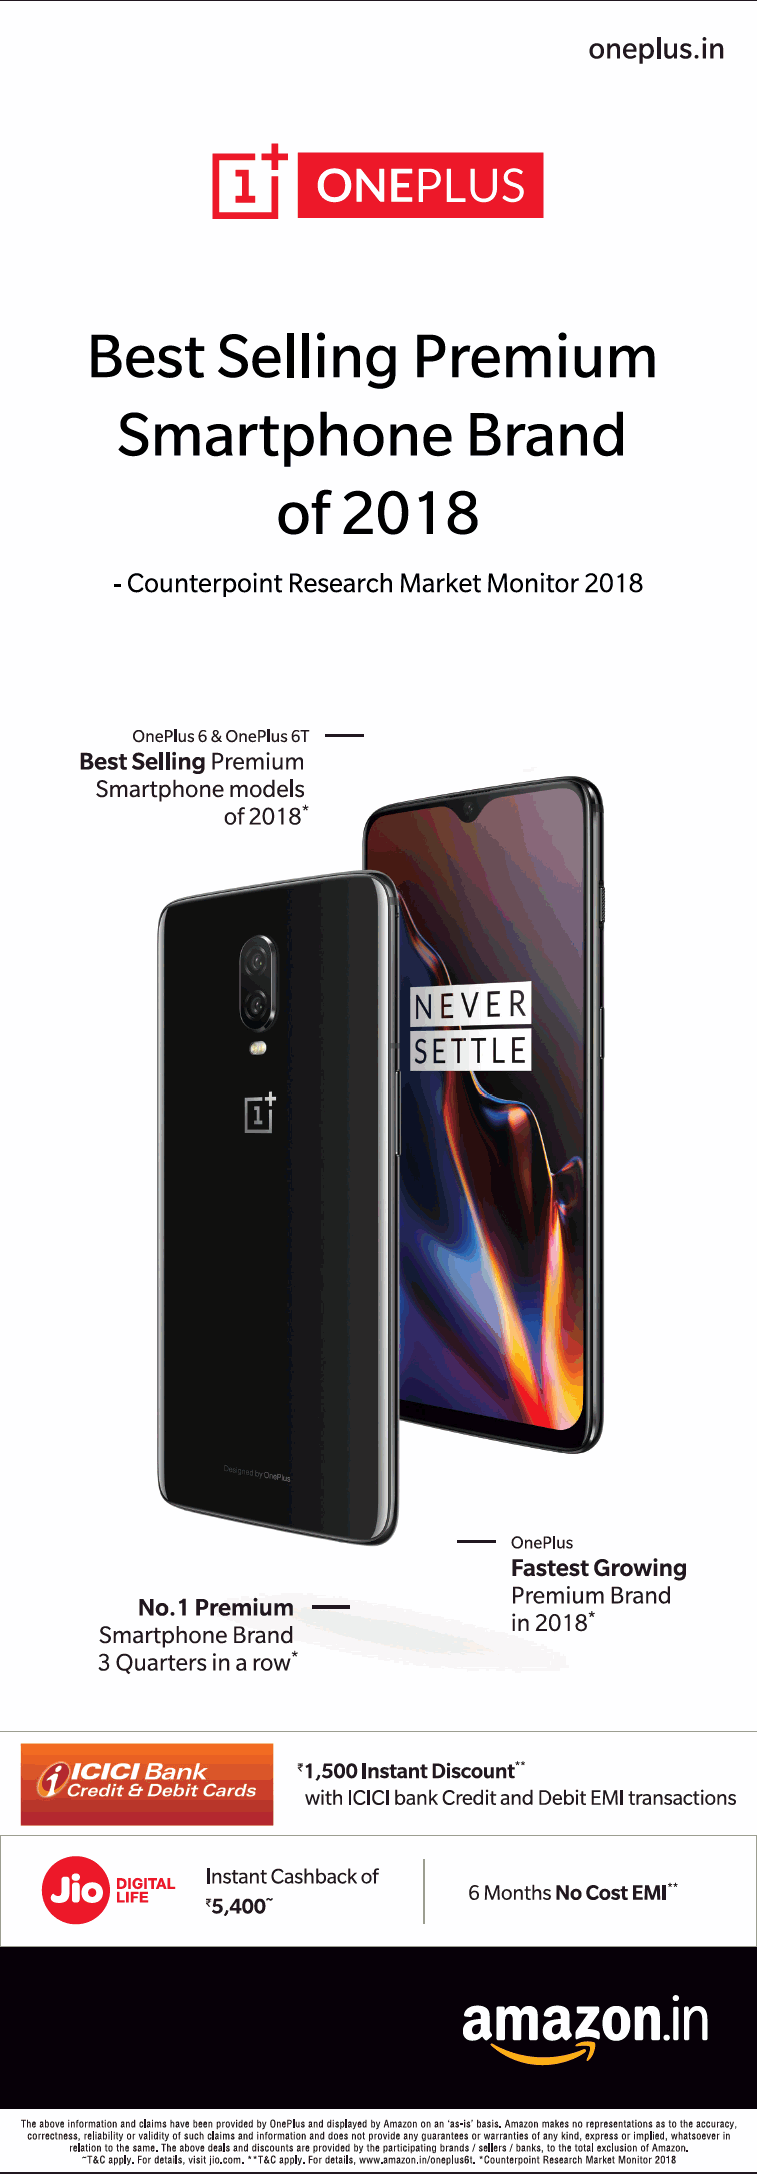 amazon.in-oneplus-best-selling-premium-smartphone-brand-of-2018-ad-times-of-india-delhi-30-01-2019.png